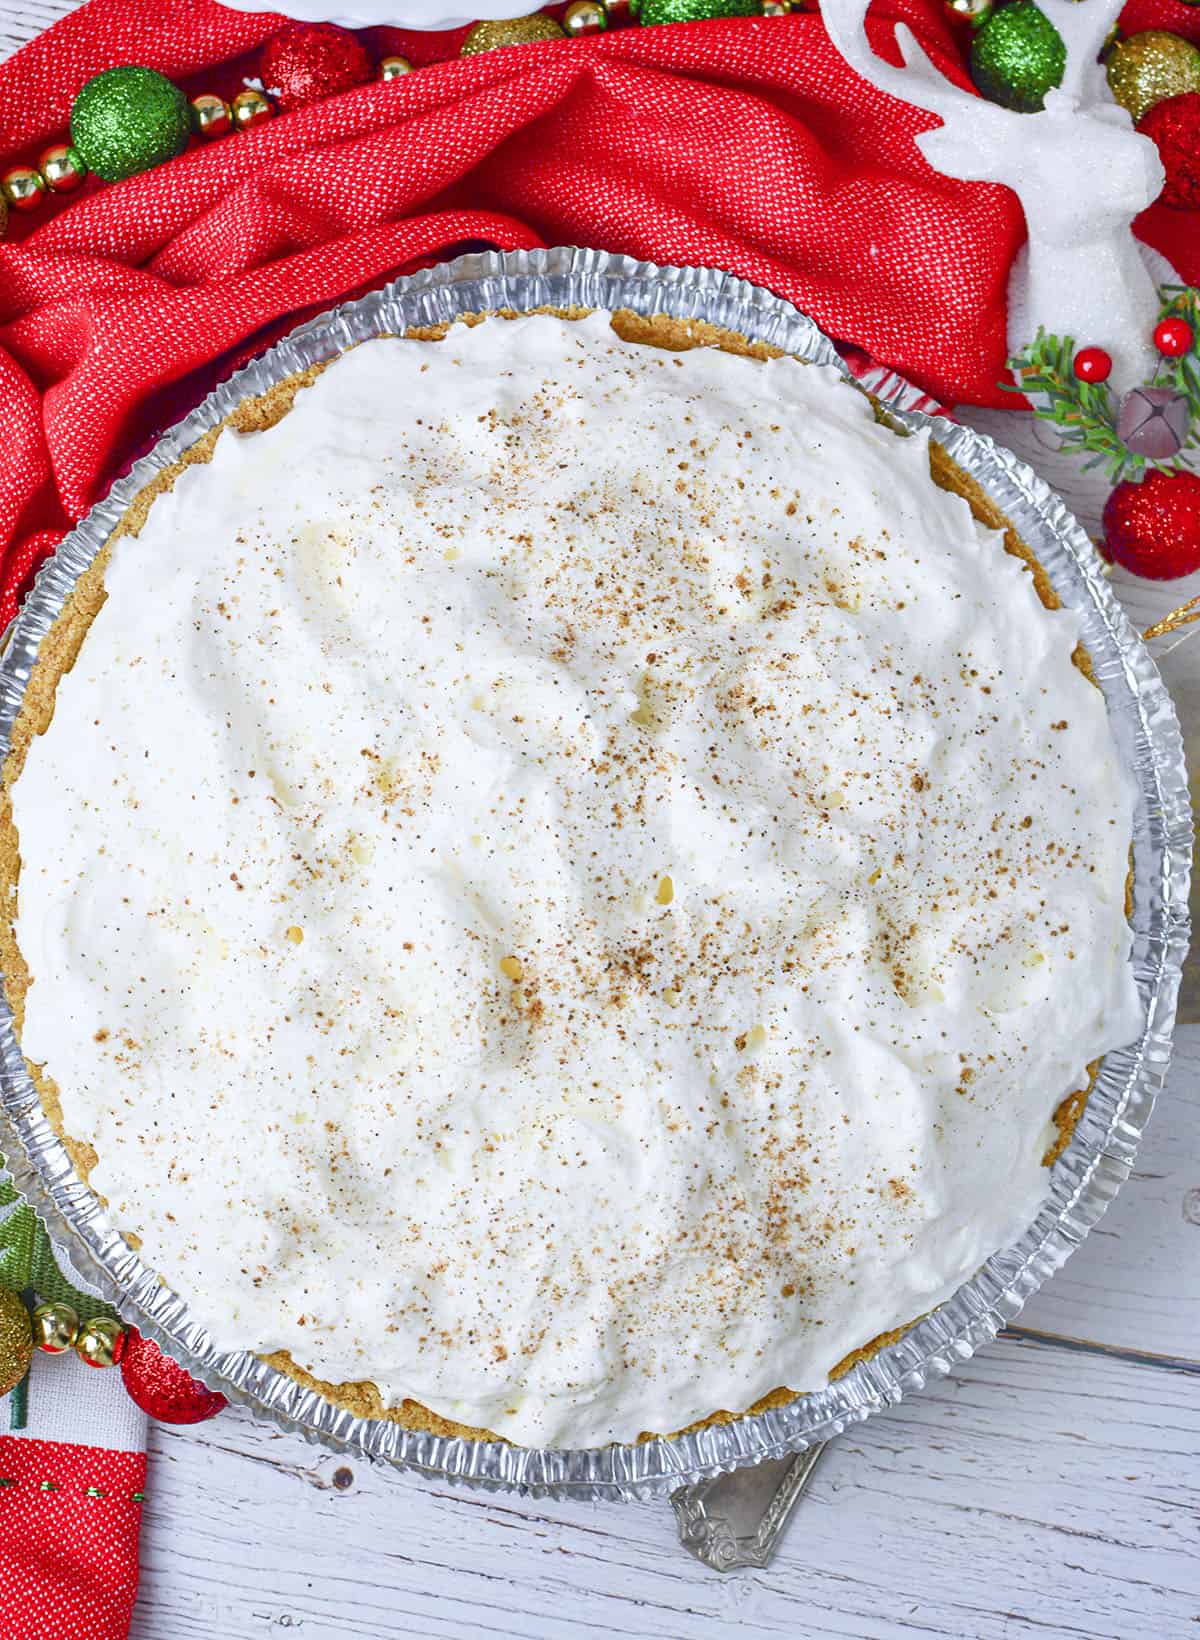 Eggnog pie on a wood background with festive red and green Christmas decor around the top